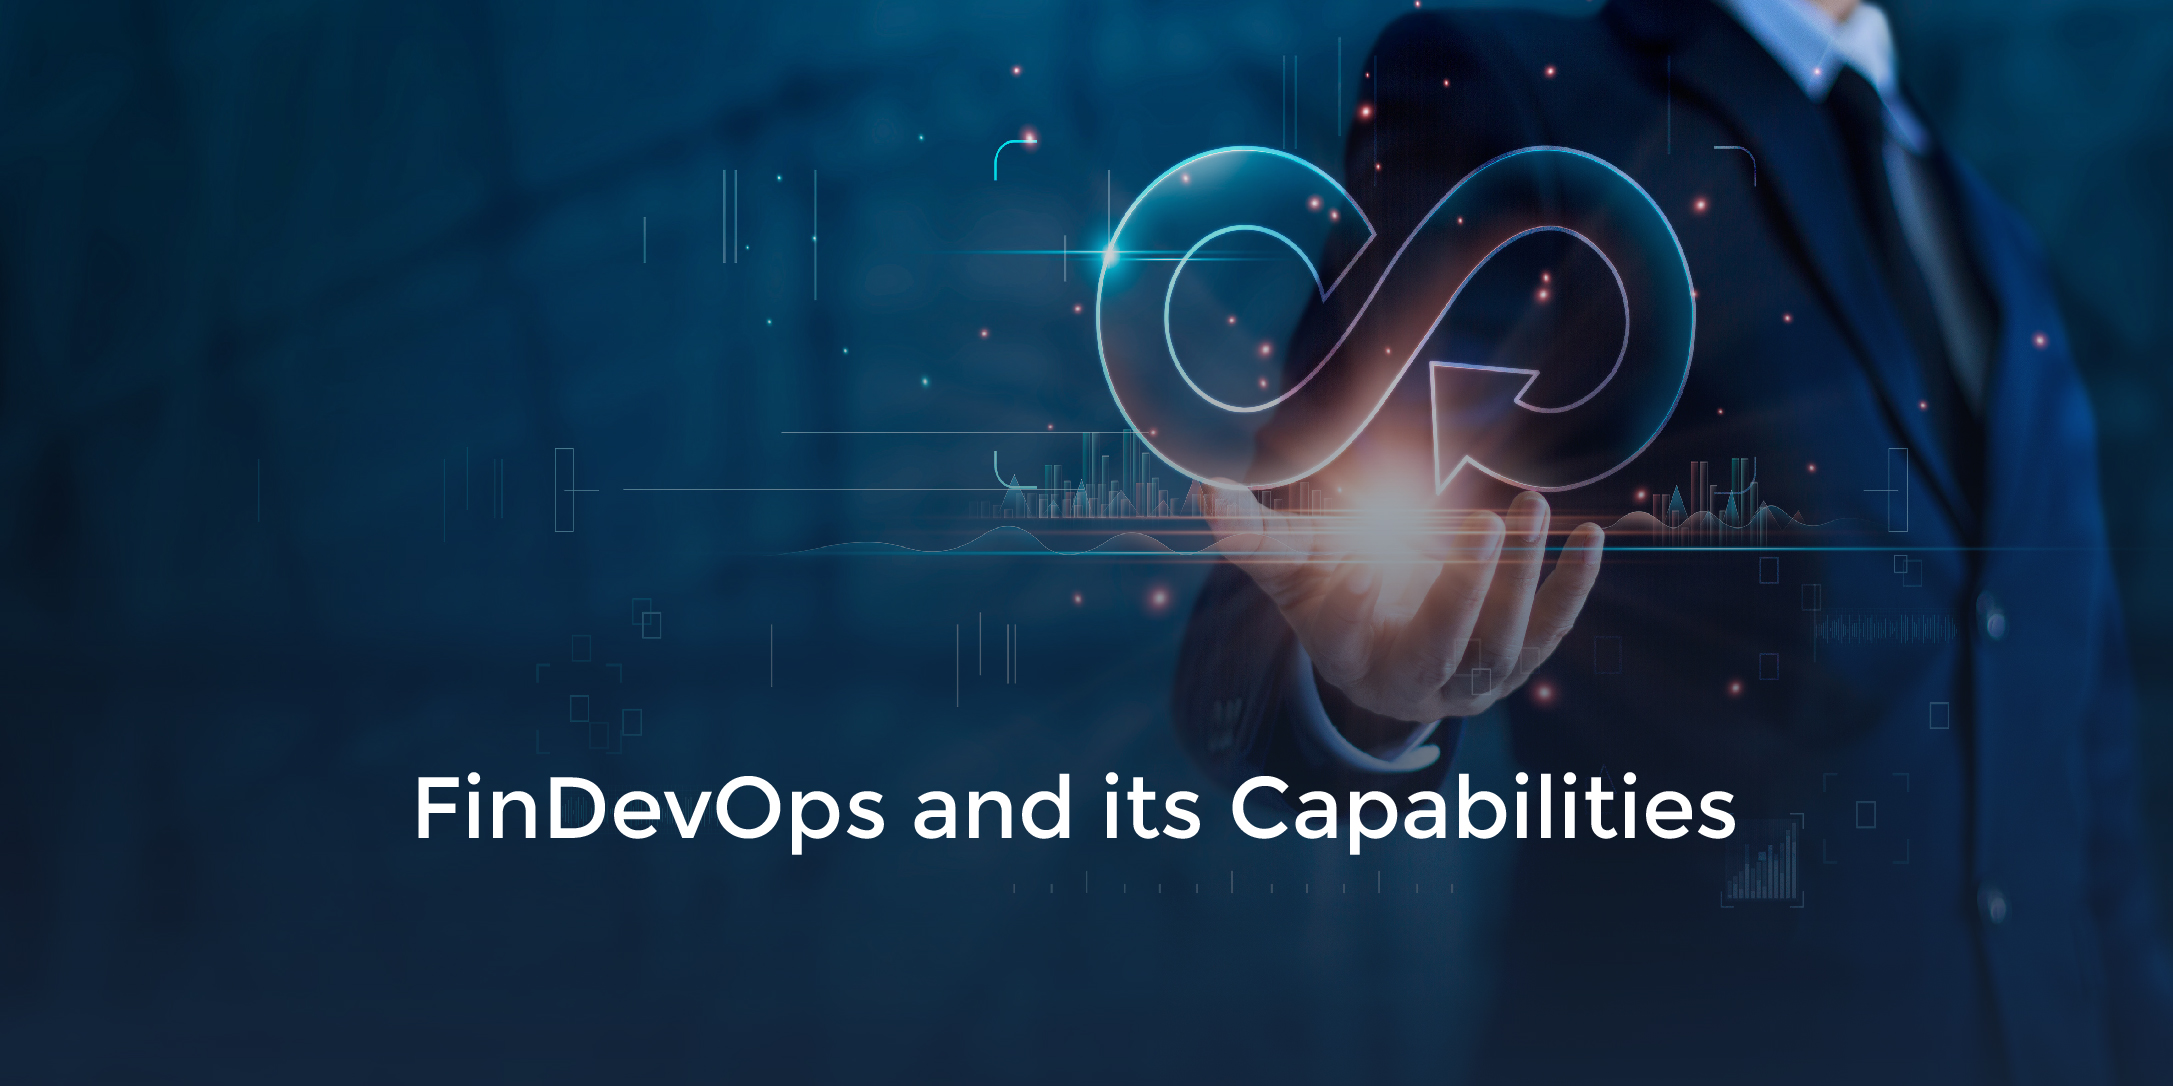 FinDevOps and its Capabilities